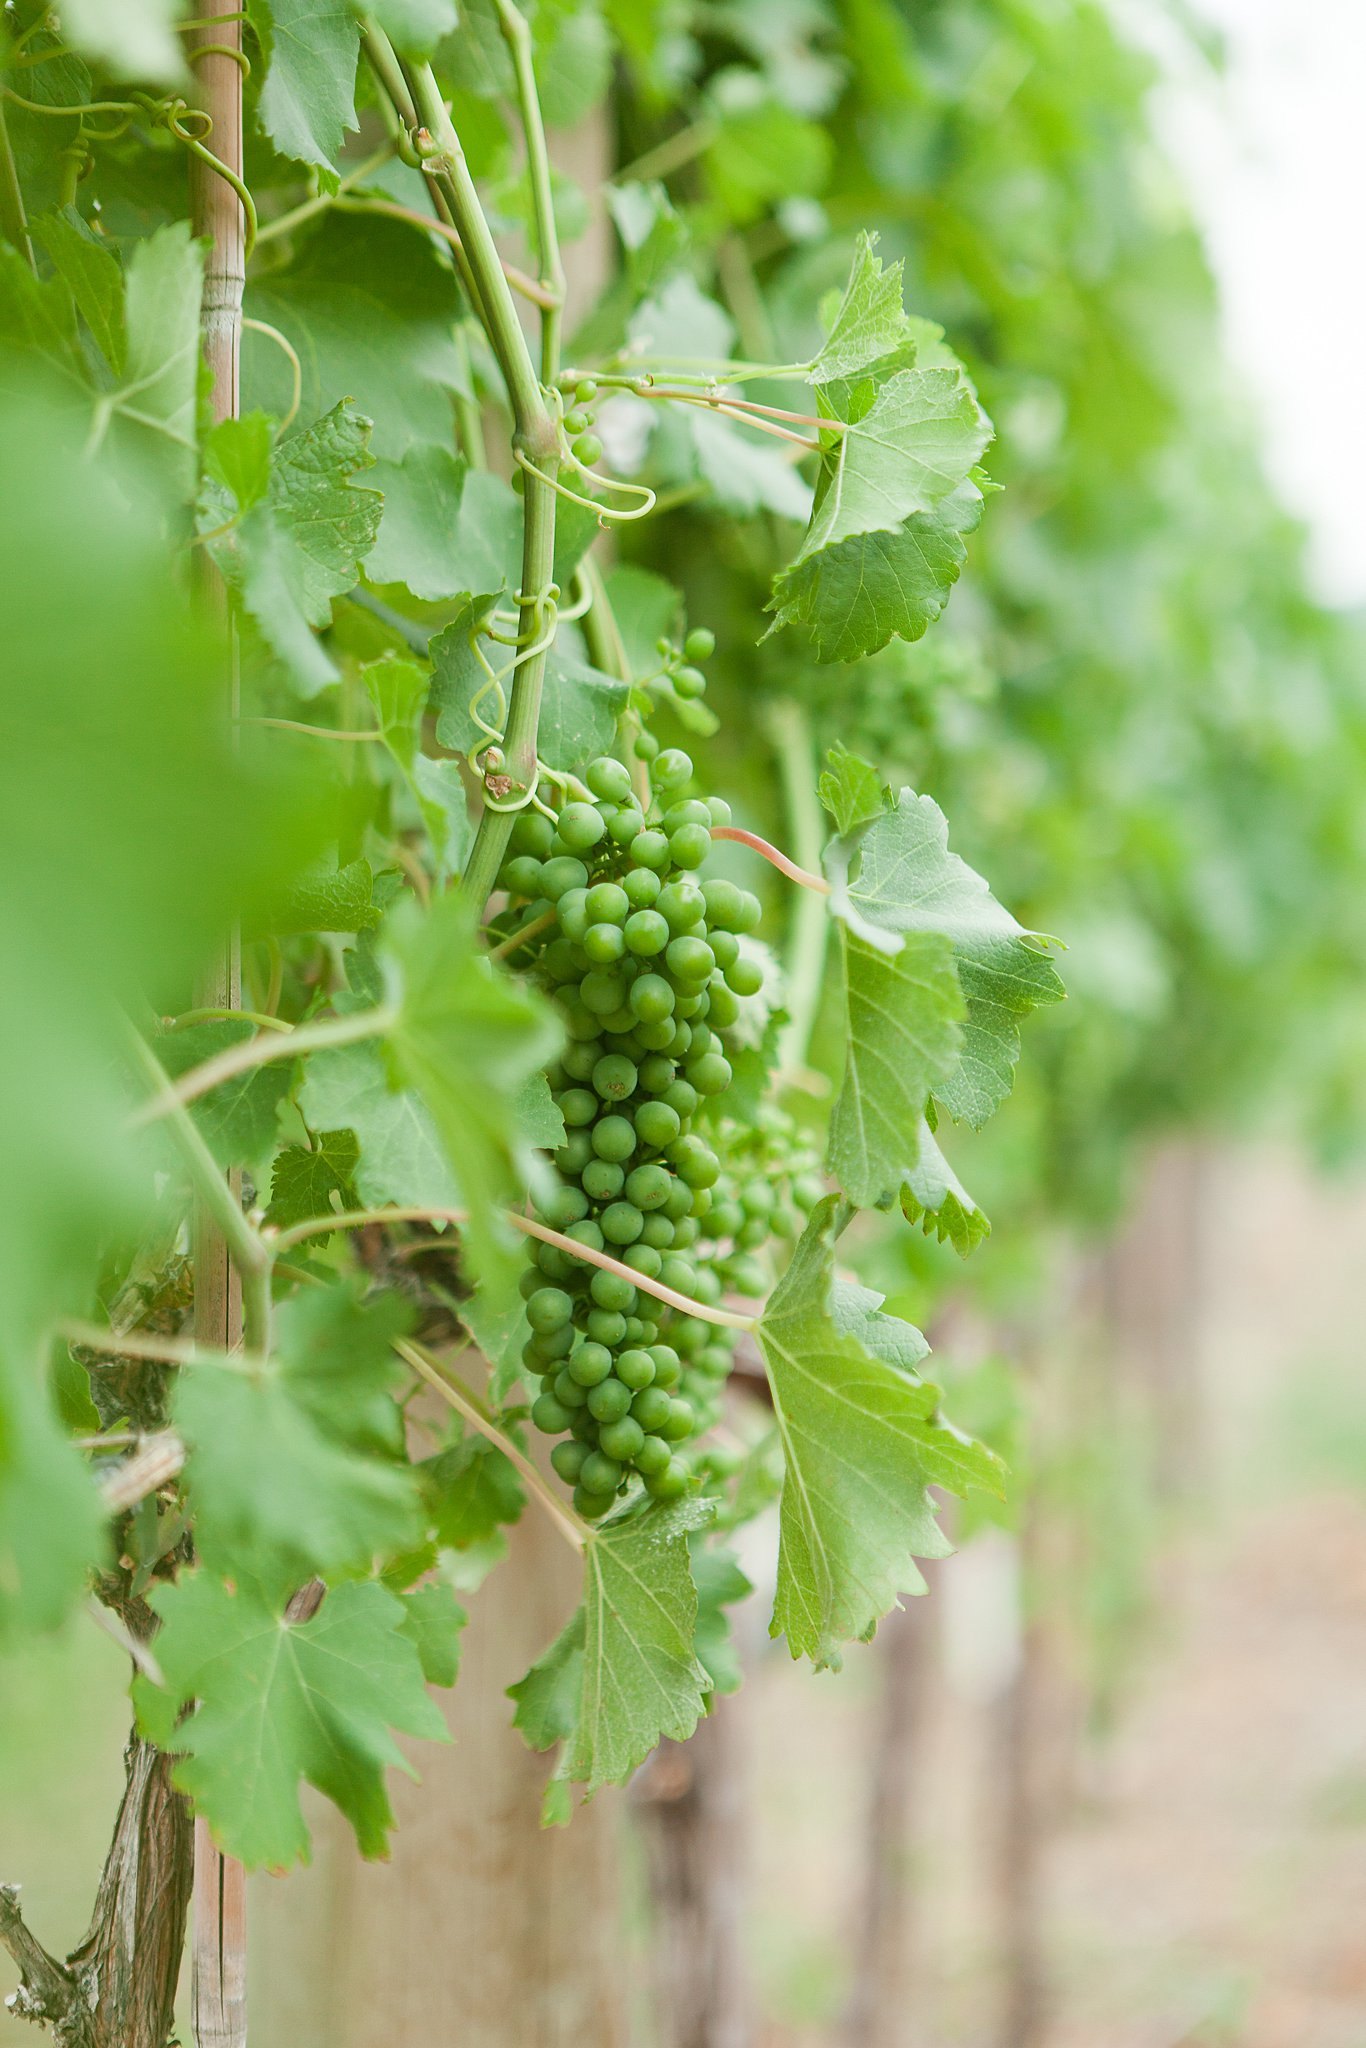 green Grapes hang from a vine in a vineyard Covert farms family estate